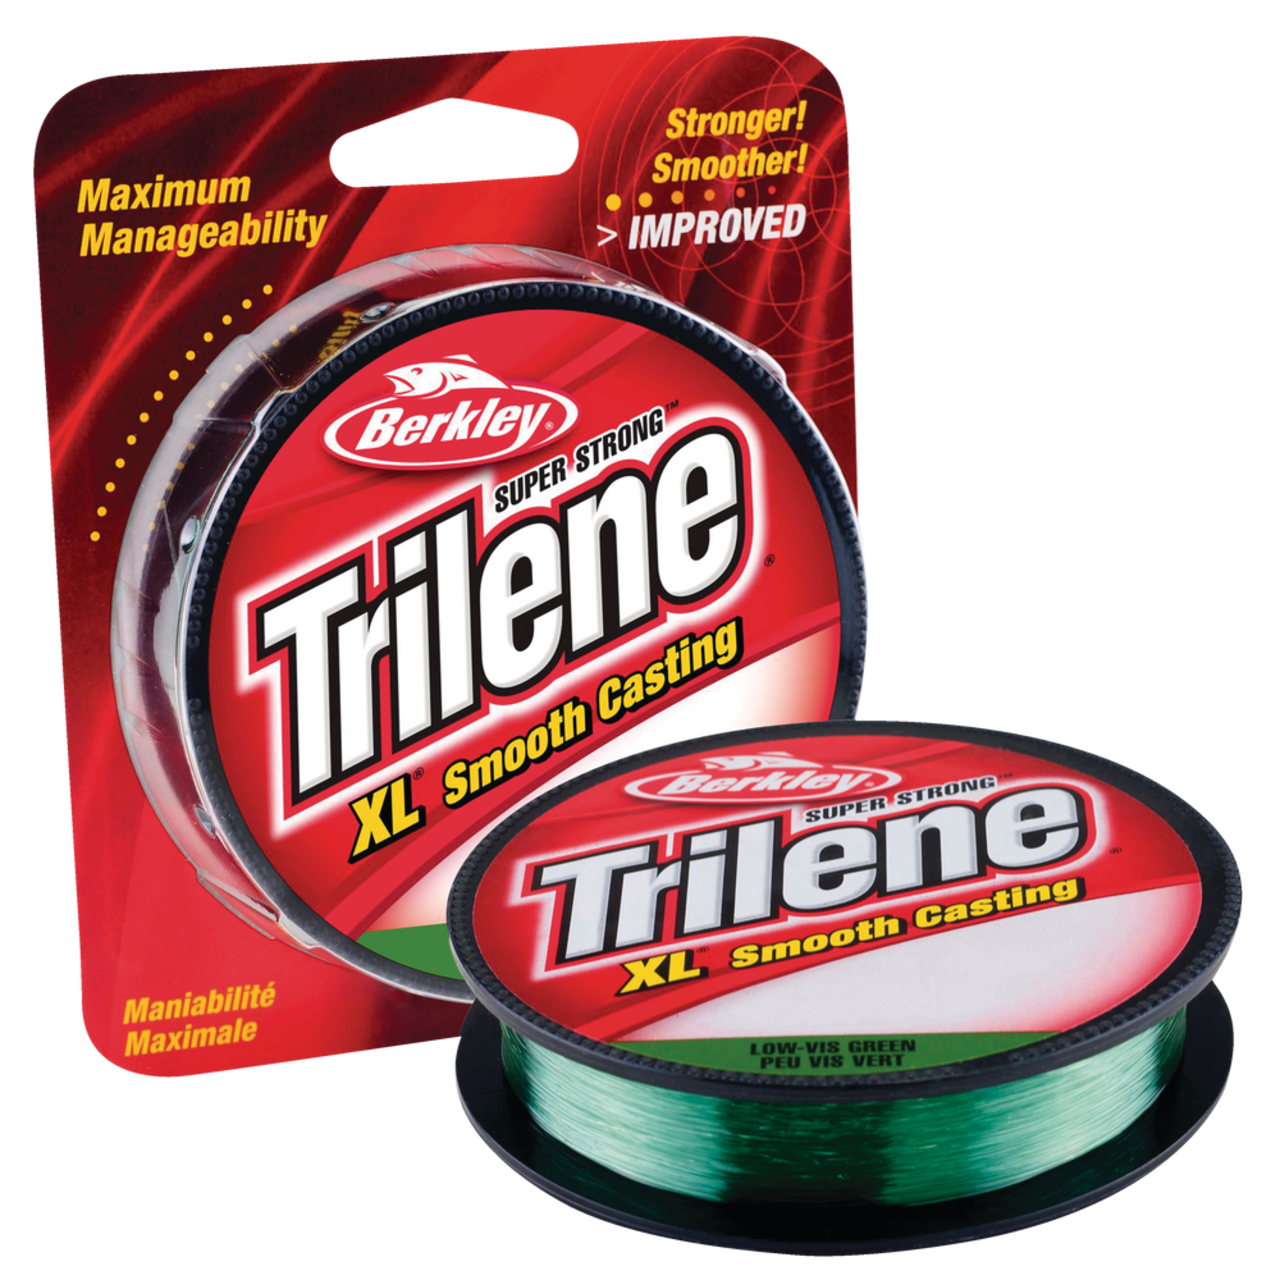 https://media-www.canadiantire.ca/product/playing/fishing/fishing-accessories/0781345/berkley-trilene-xl-filler-spool-green-8lb-300-yards-681e4cfa-21d7-44c4-9574-49c6a62f6ccd.png?imdensity=1&imwidth=640&impolicy=mZoom